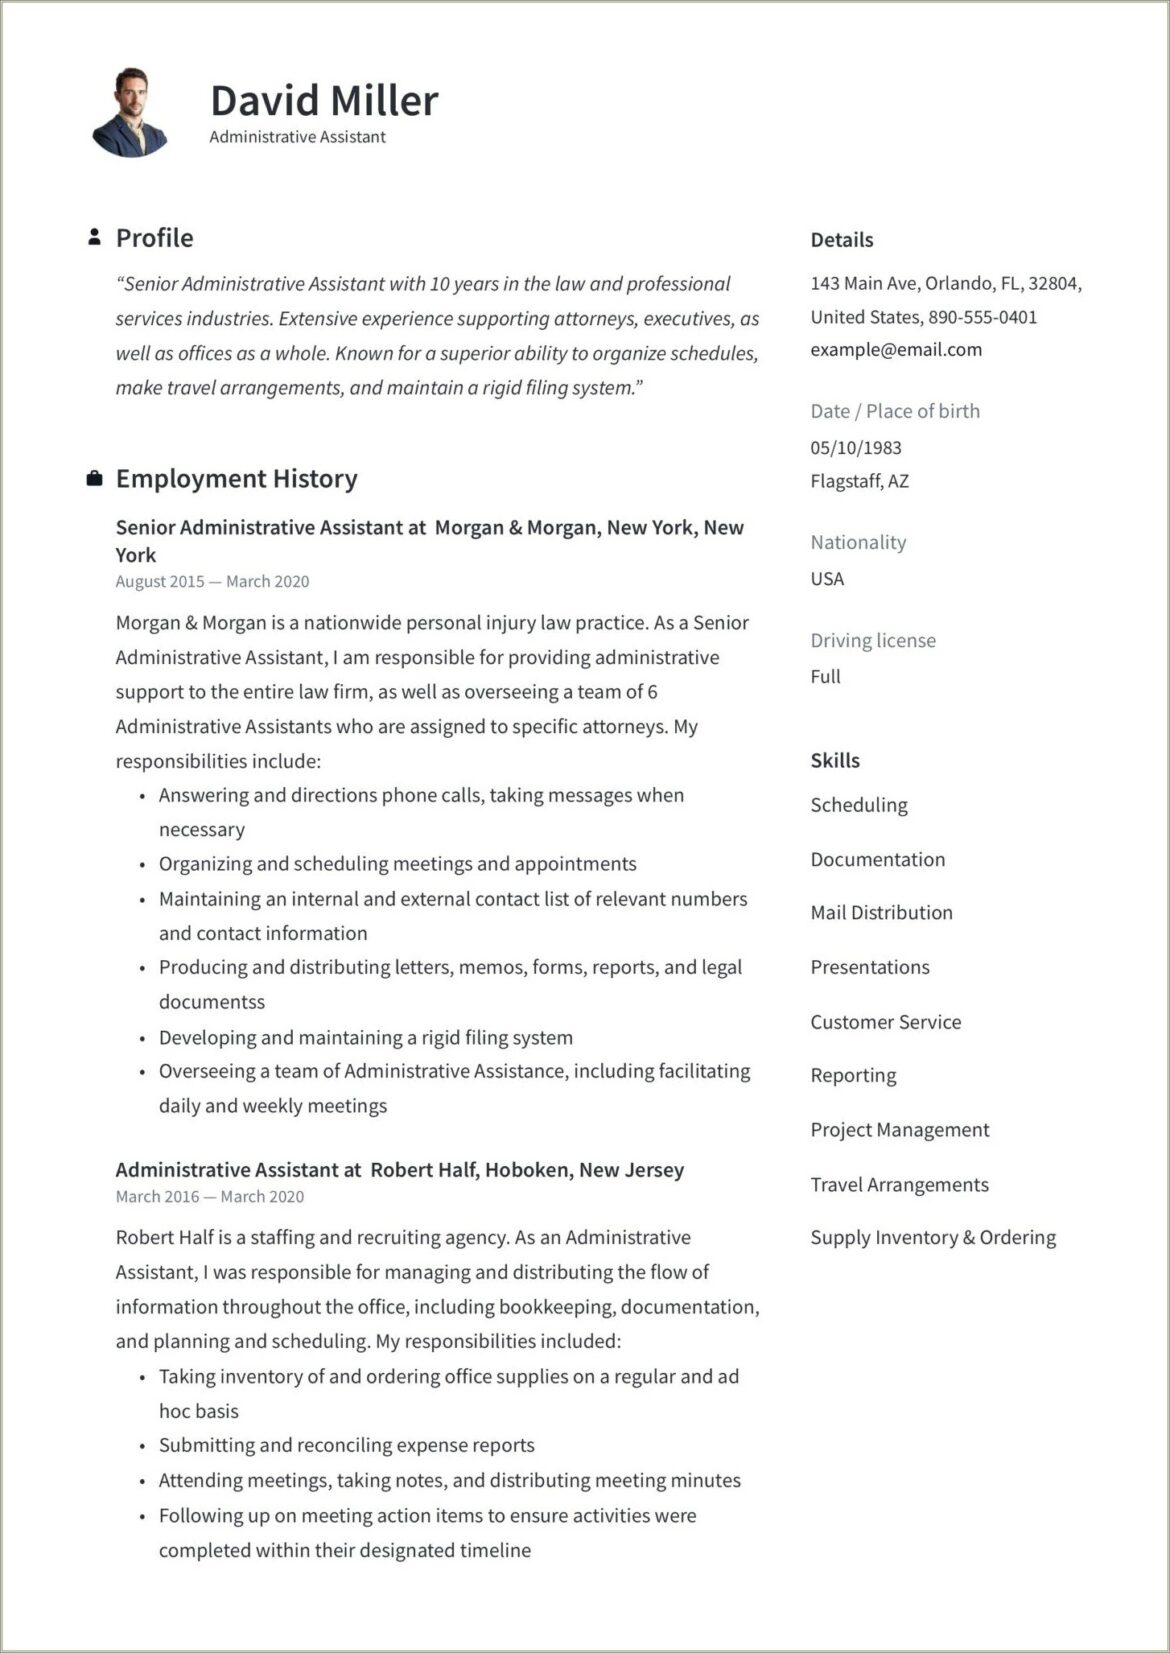 Sample Resume For Administrative Assistant And Customer Service